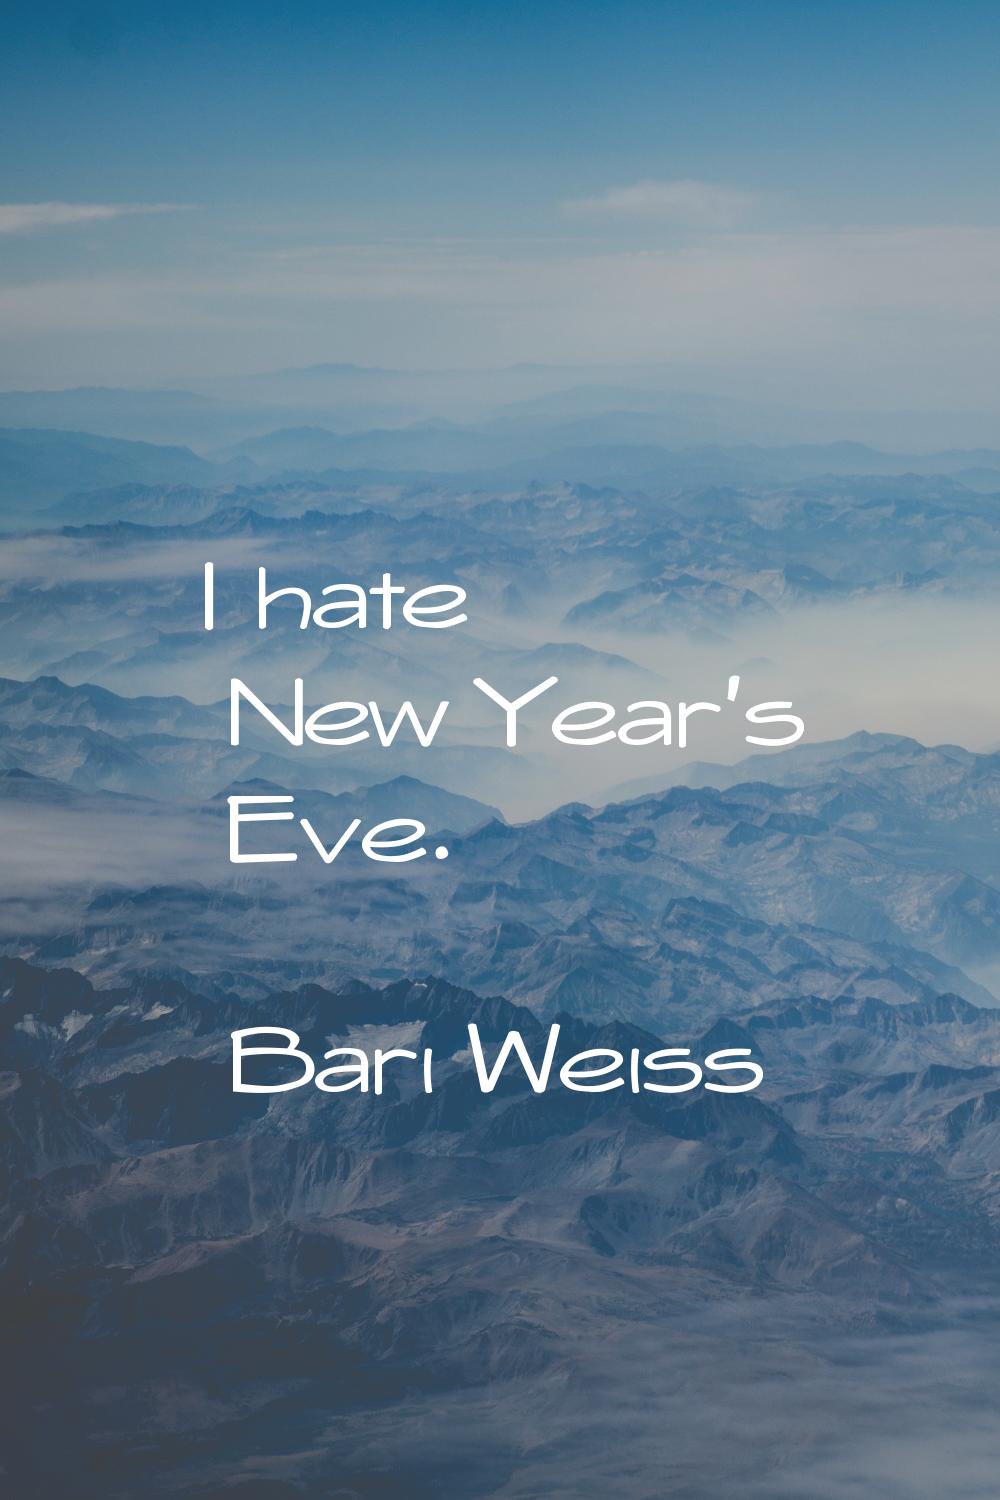 I hate New Year's Eve.